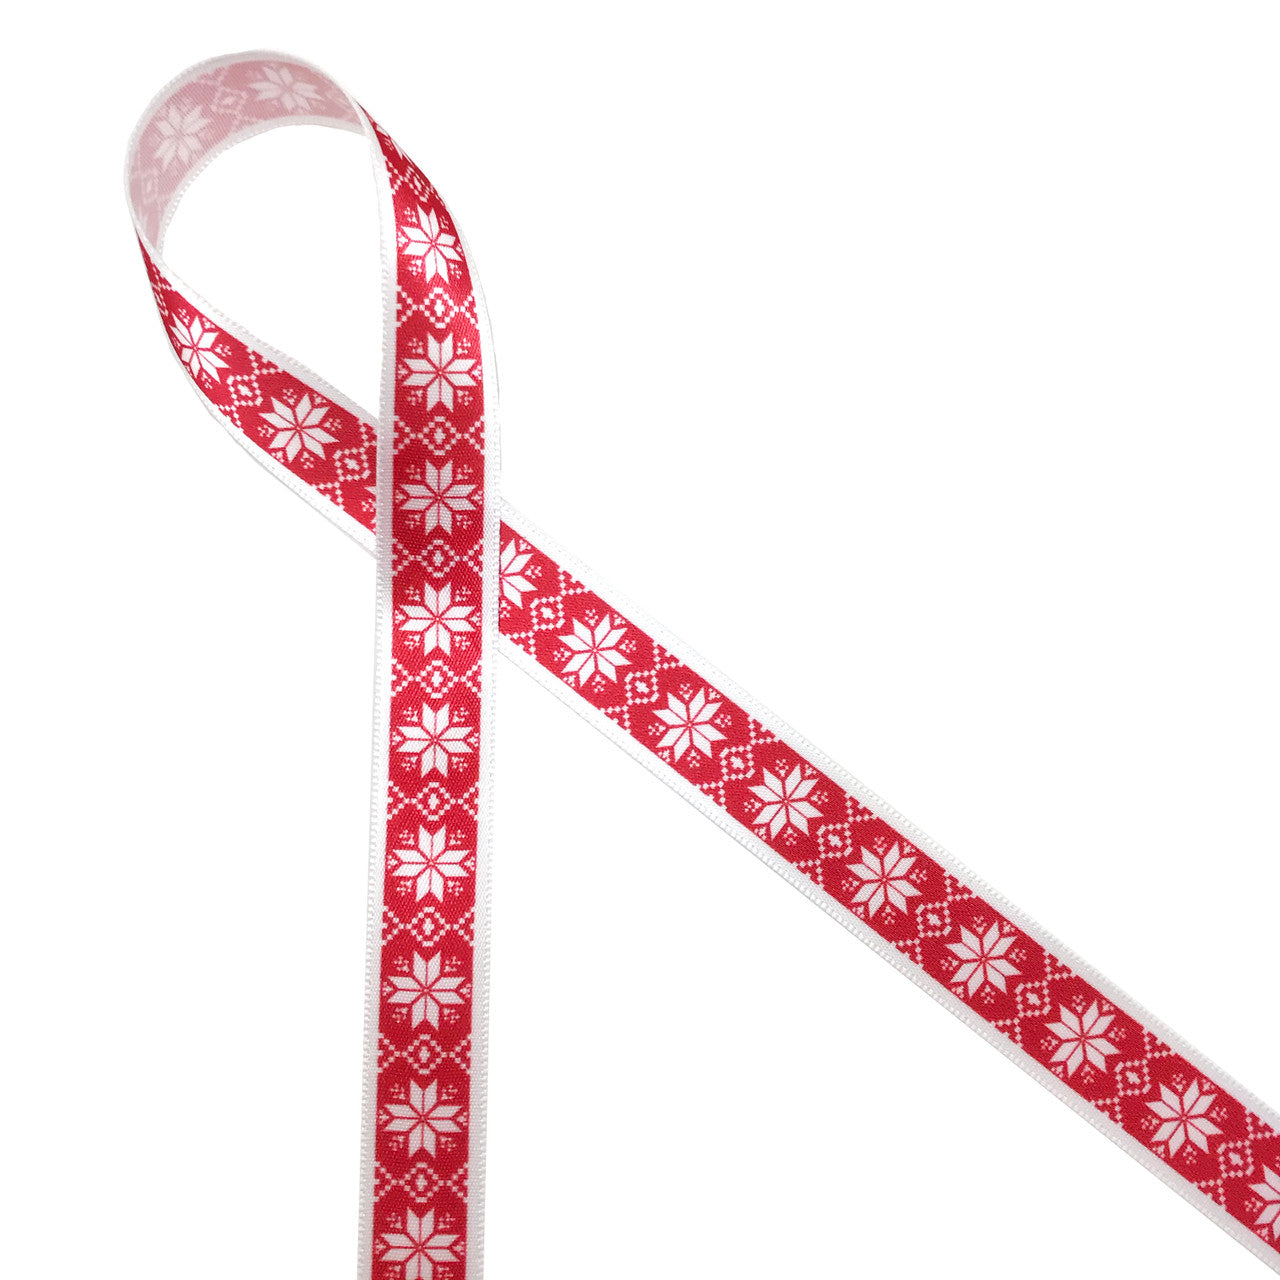 Nordic design snowflakes on a red background printed on 5/8" white single face satin  ribbon is an ideal ribbon for Holiday and Winter themed gifts, parties and favors. Tie this ribbon on cookies, cake pops and candy treats to make a sweets table a Winter Wonderland! All our ribbons are designed and printed in the USA